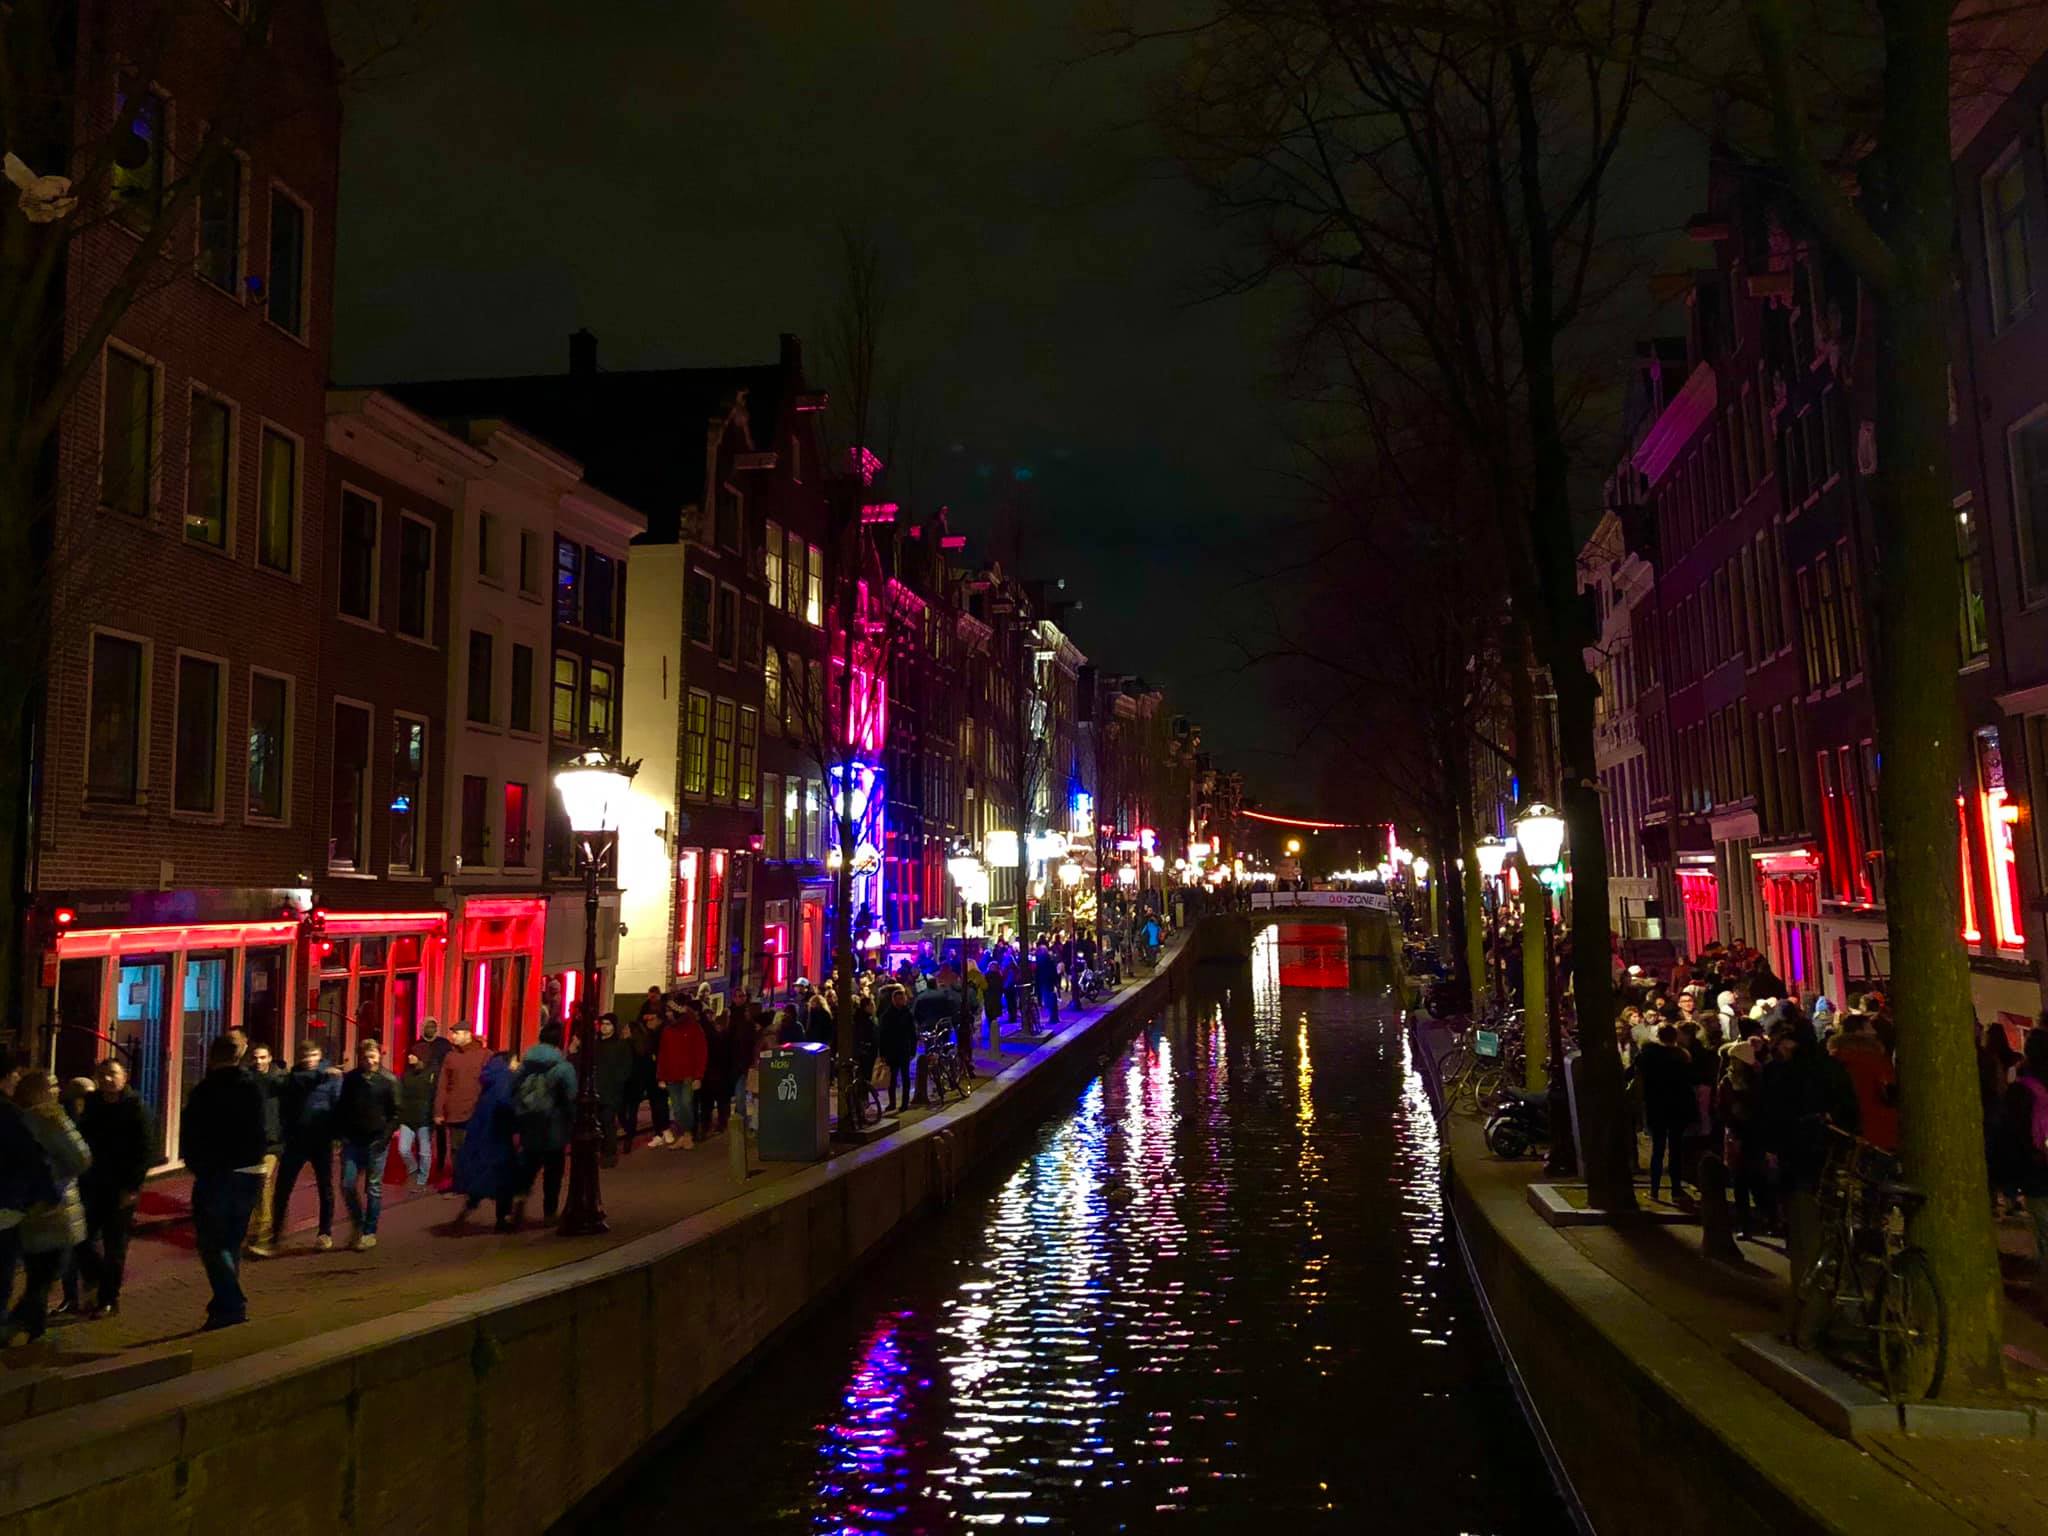 The Red Light District in Amsterdam.